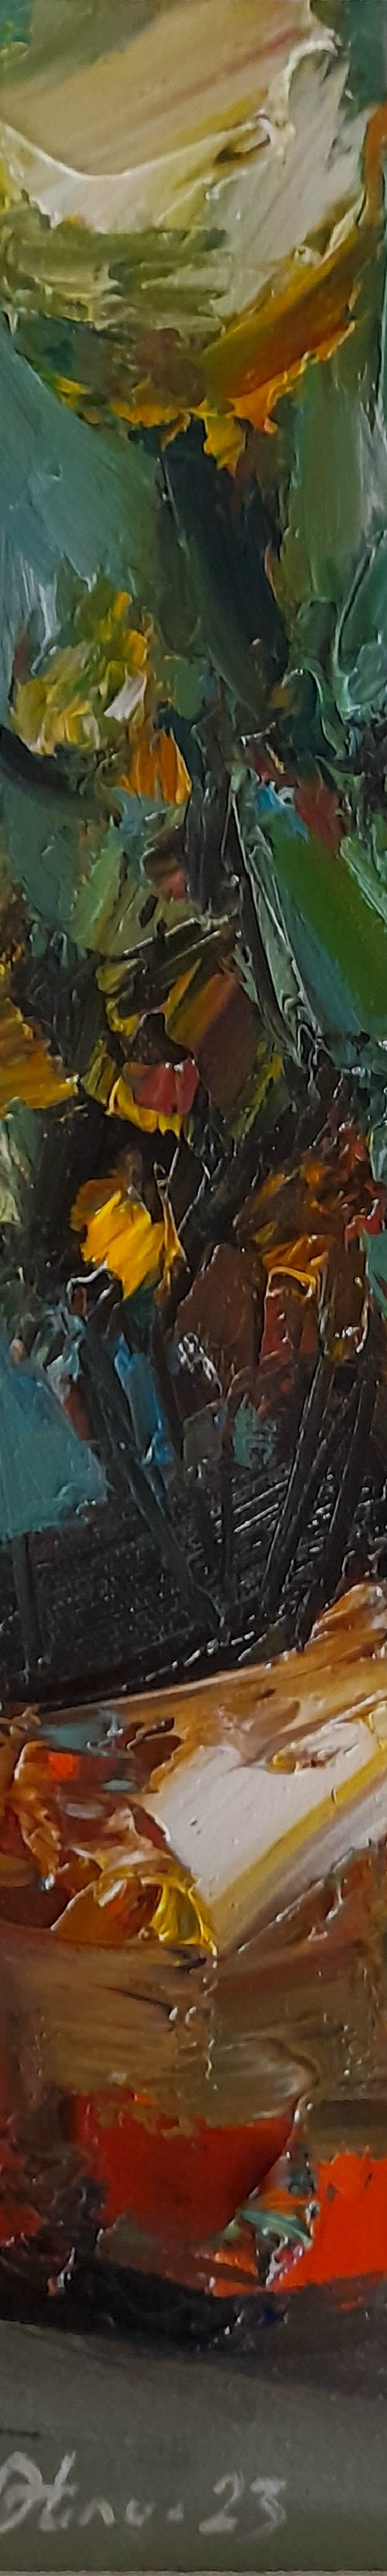 Abstract flowers (30x40cm, oil painting, palette knife) by Matevos Sargsyan